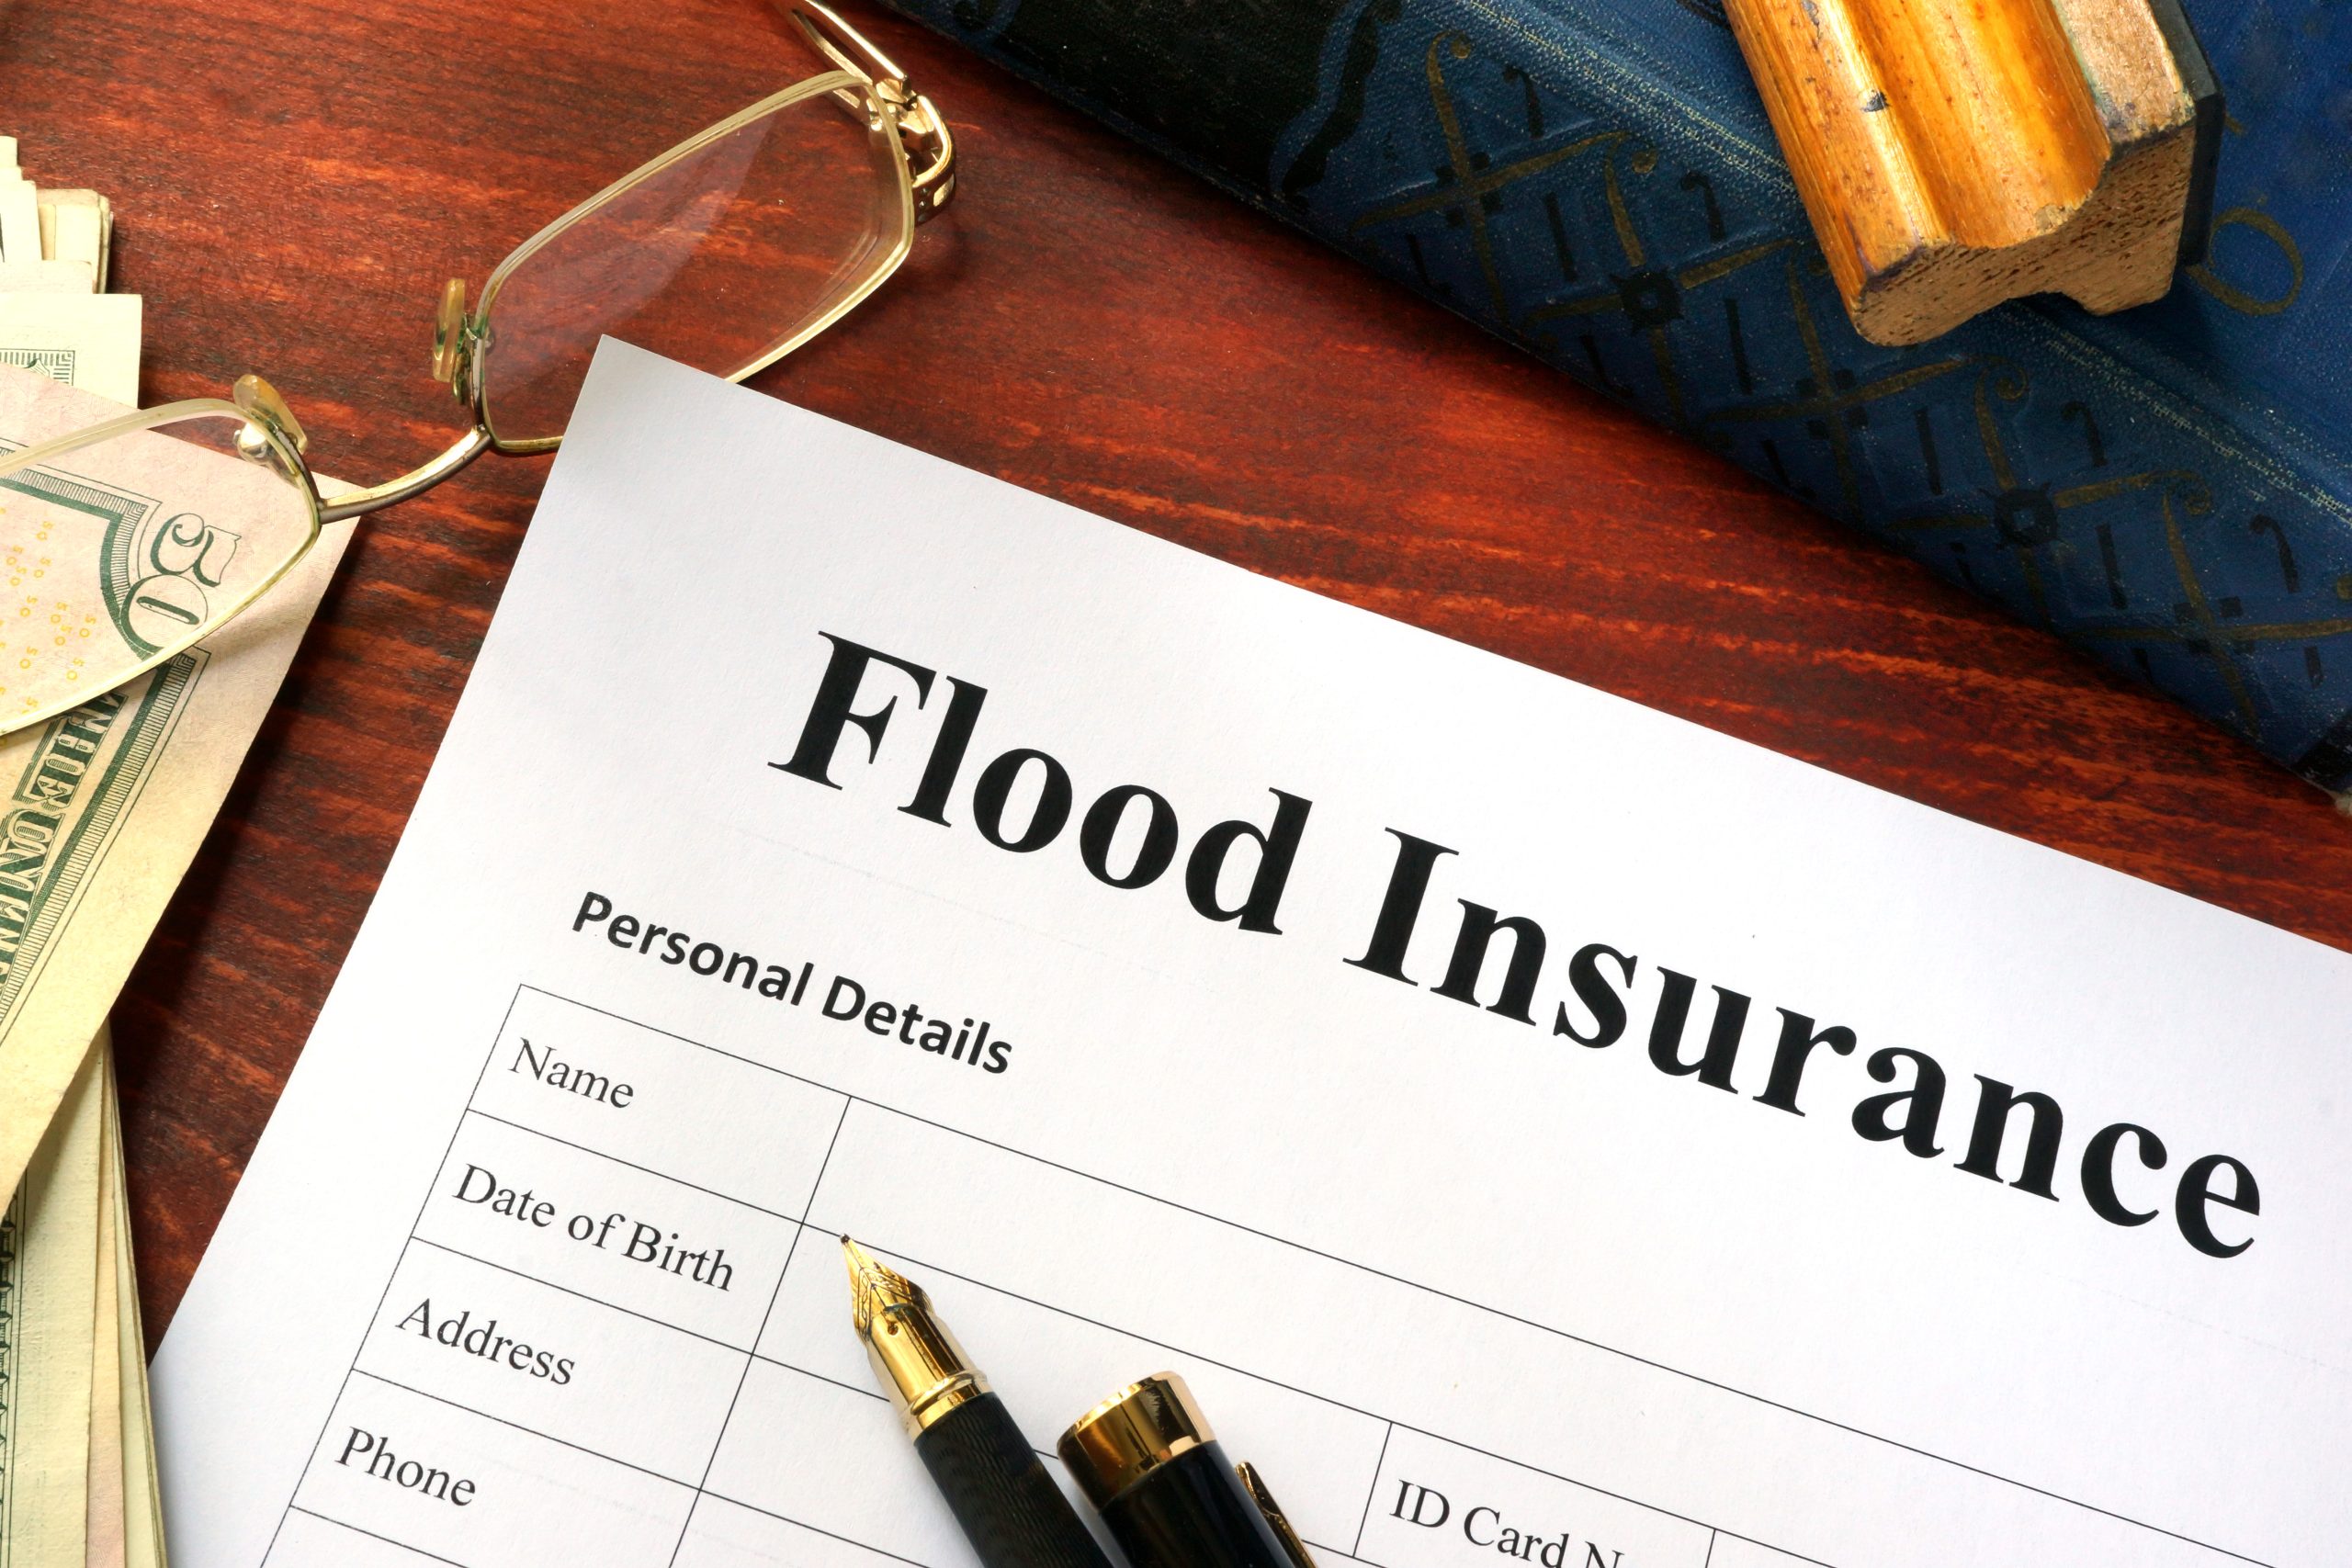 Flood Insurance Form On A Table With A Book.